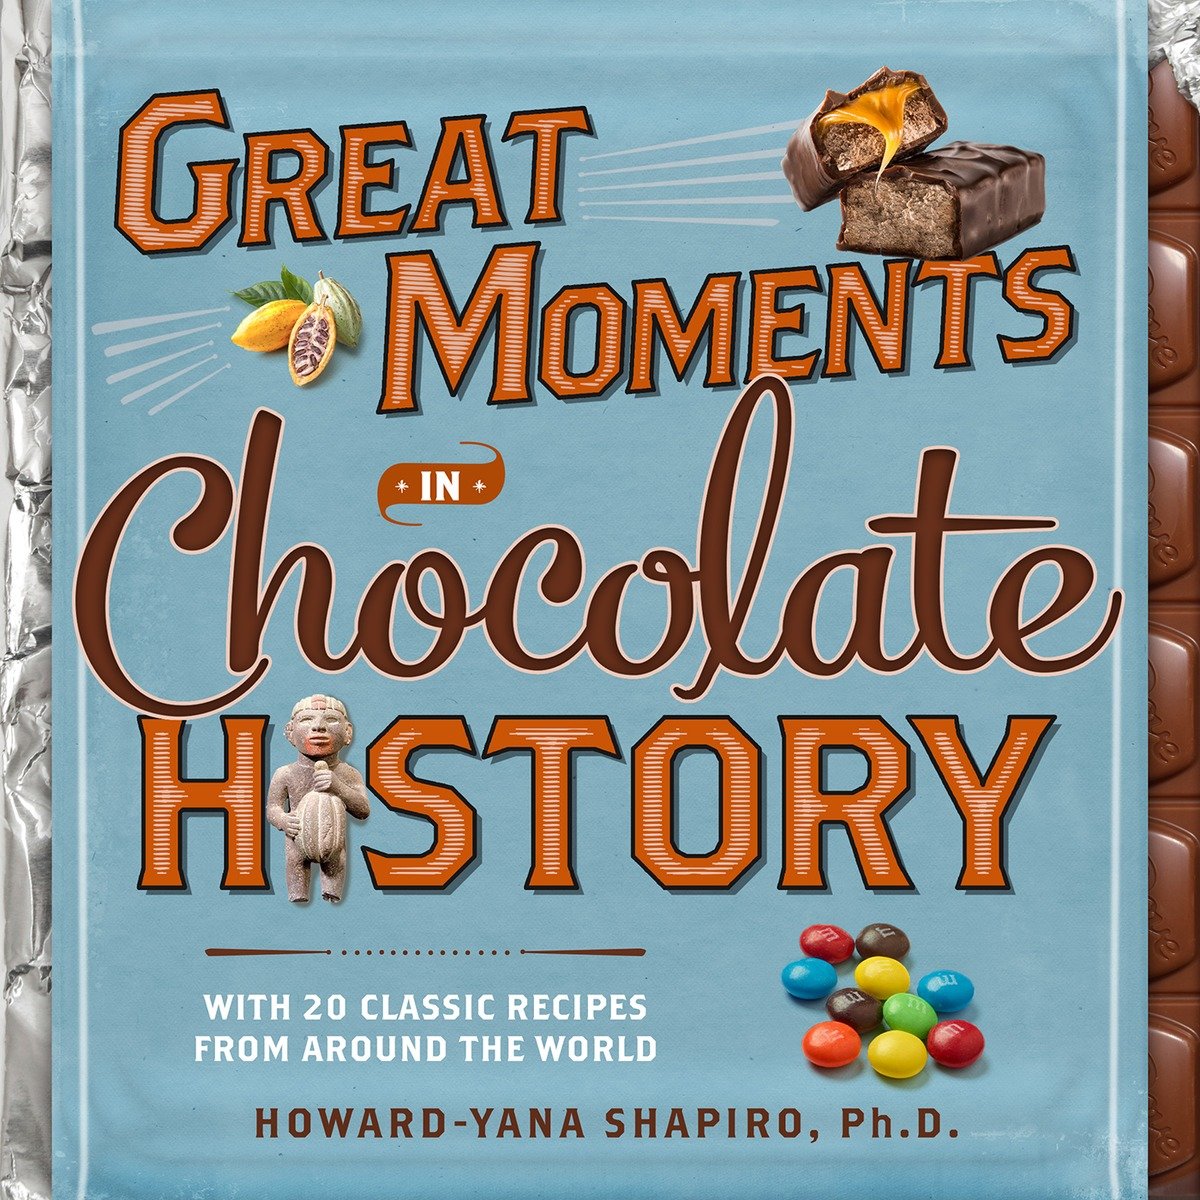 Great Moments In Chocolate History (Hardcover Book)